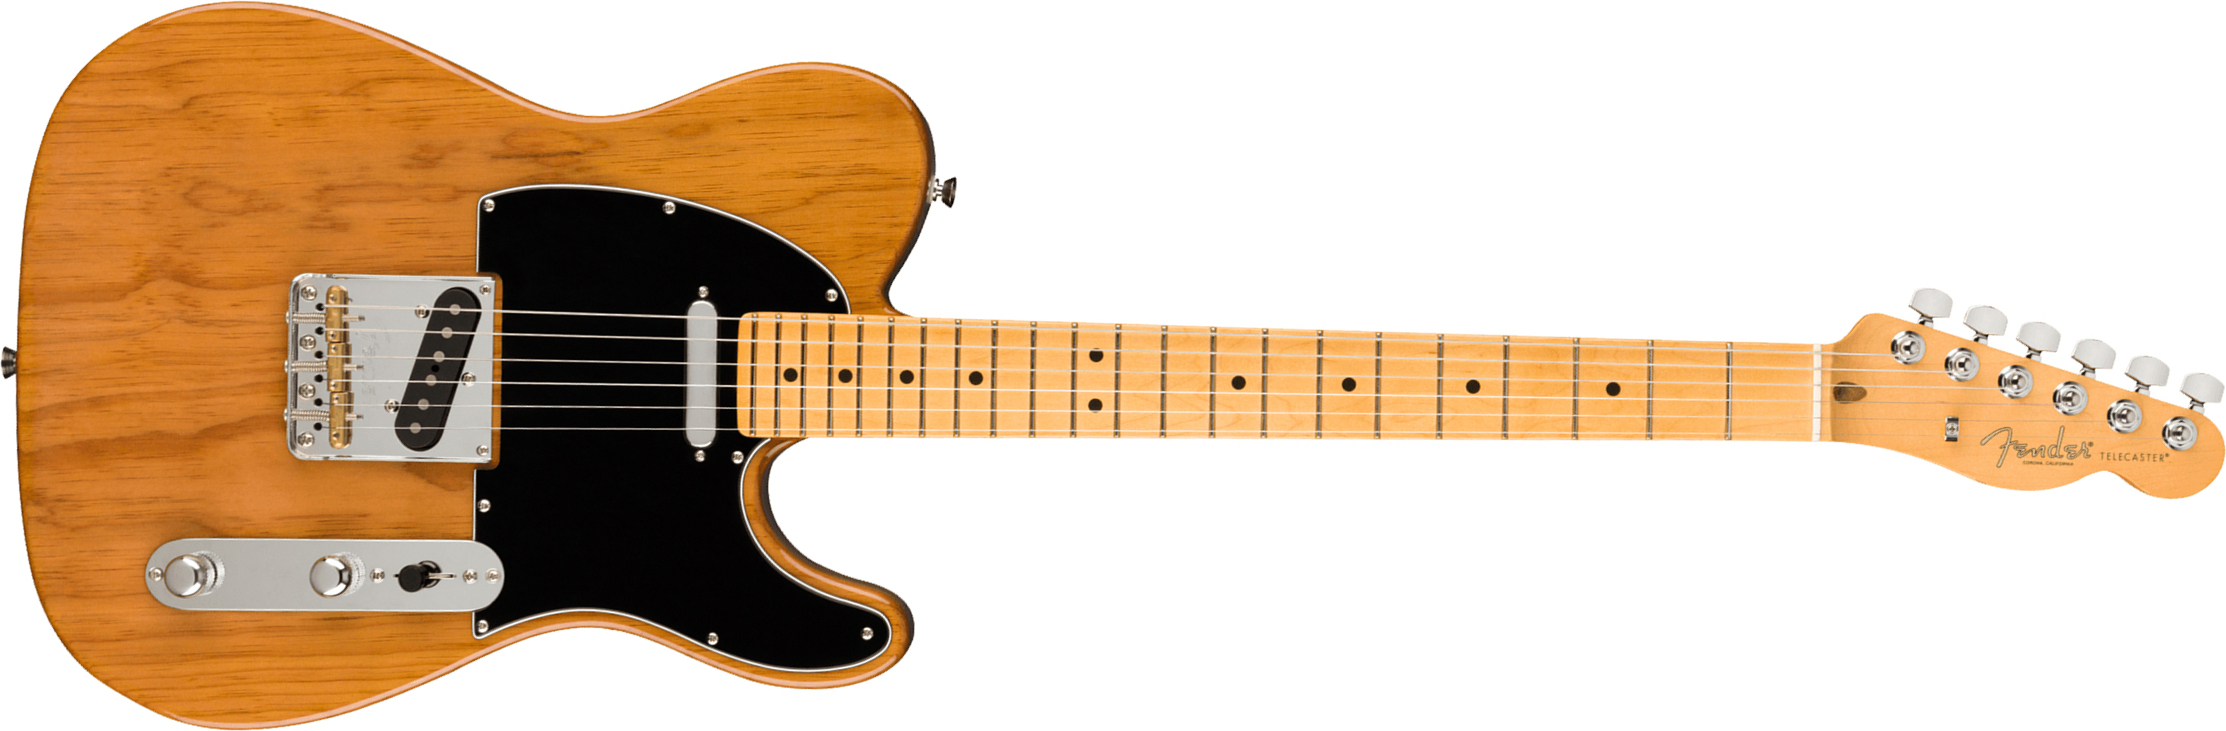 Fender Tele American Professional Ii Usa Mn - Roasted Pine - Guitare Électrique Forme Tel - Main picture